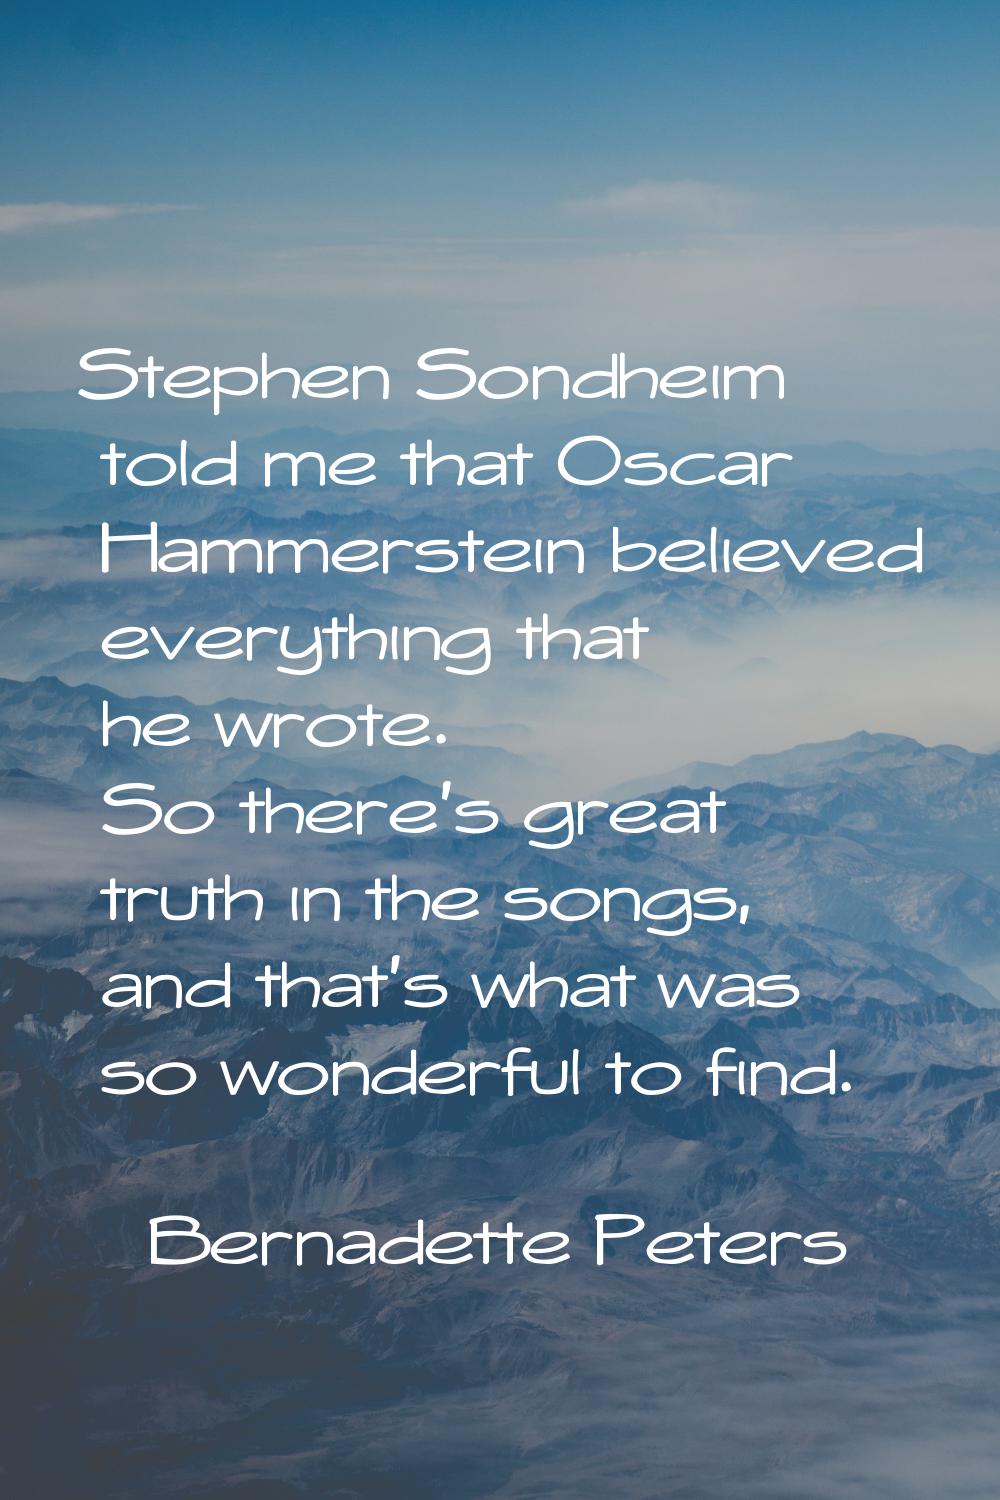 Stephen Sondheim told me that Oscar Hammerstein believed everything that he wrote. So there's great